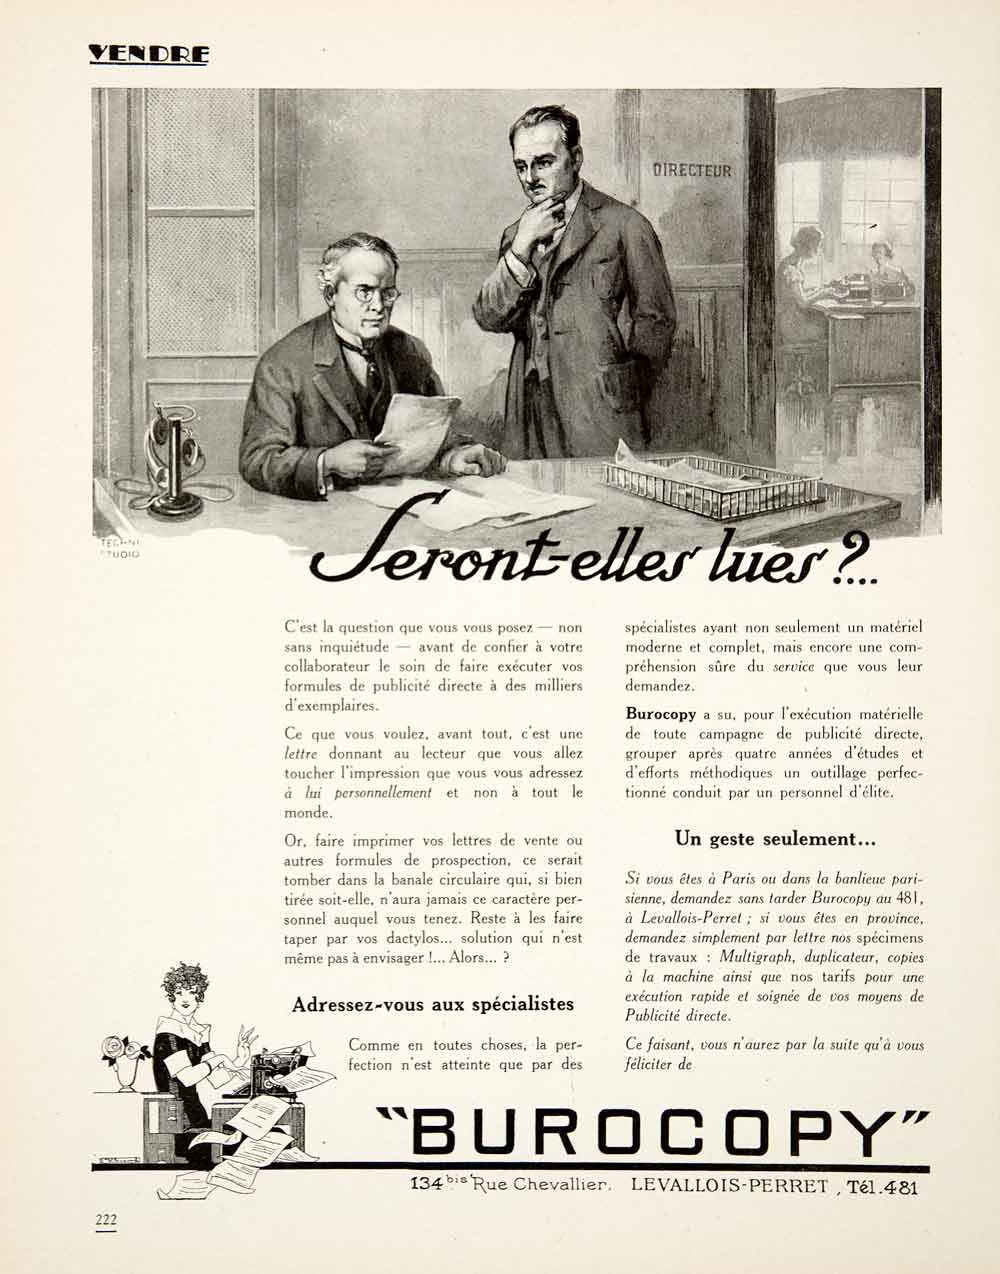 1925 Ad Burocopy 134 Rue Chevallier Advertising Agency Publicity French VEN4